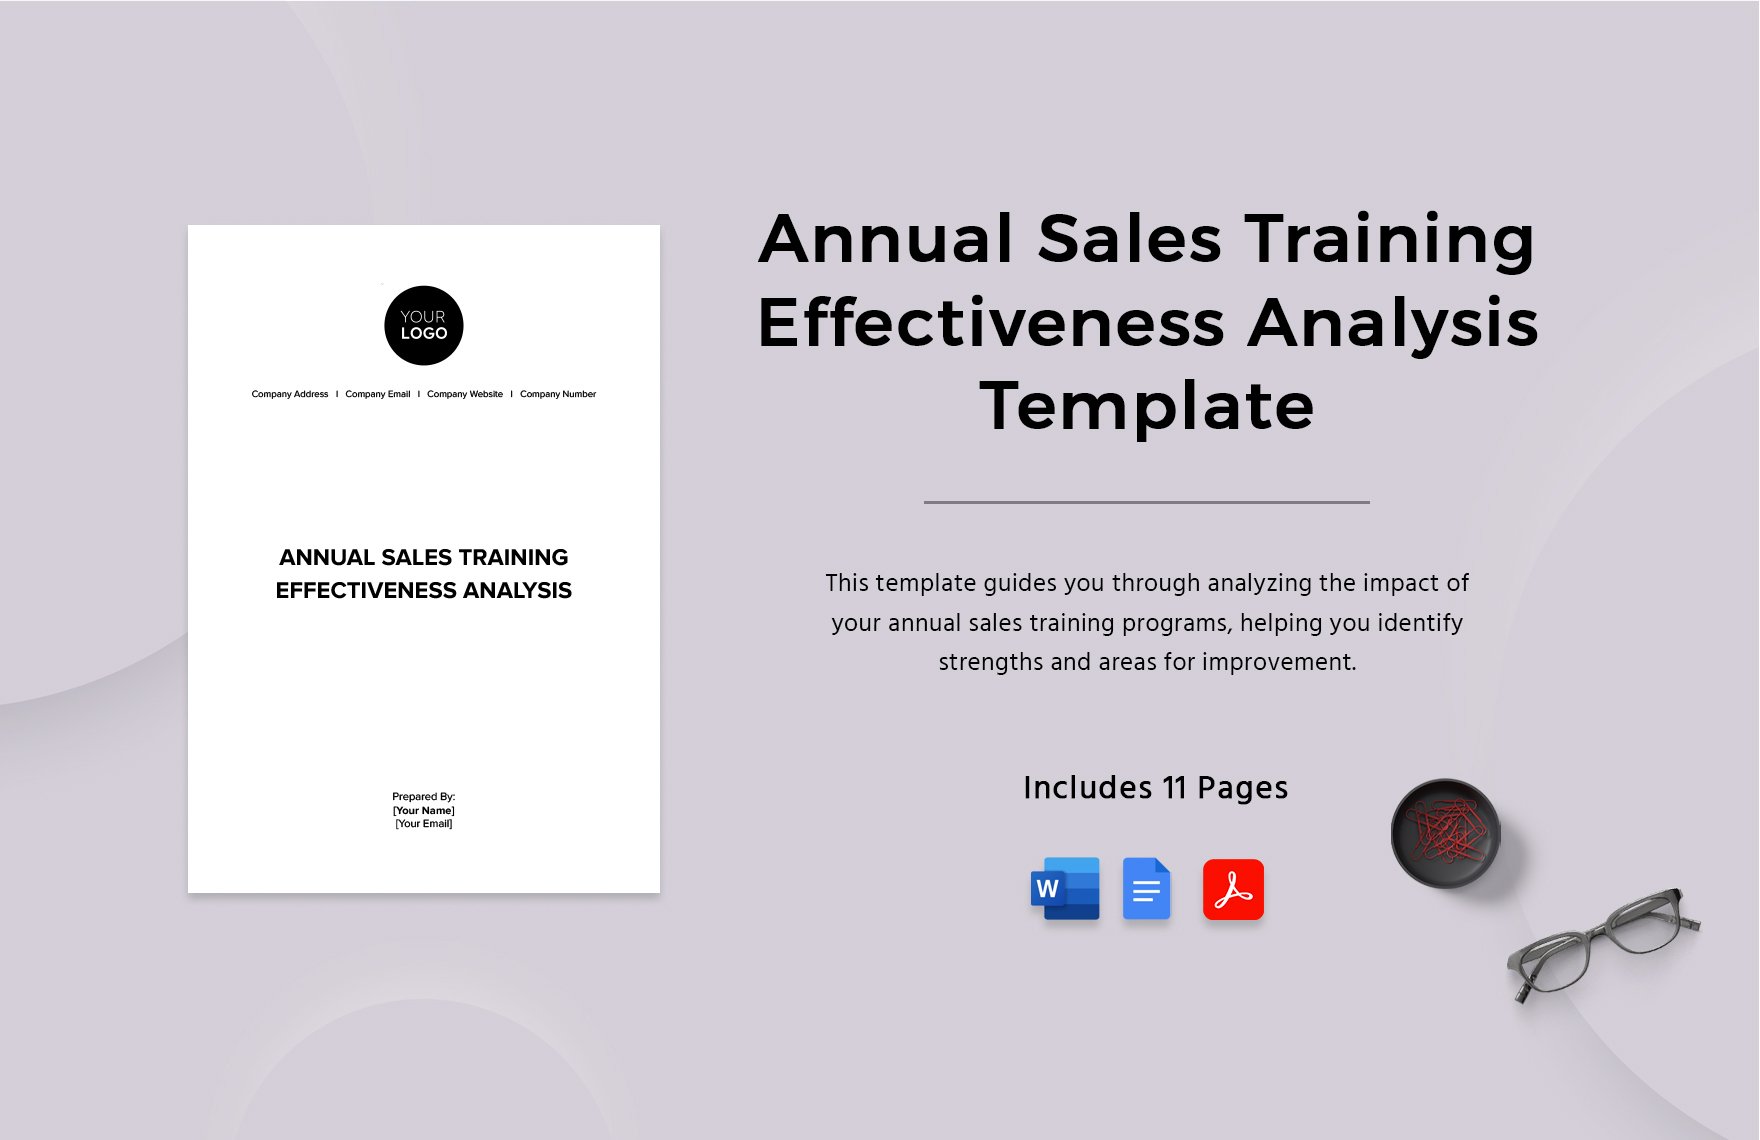 Annual Sales Training Effectiveness Analysis Template